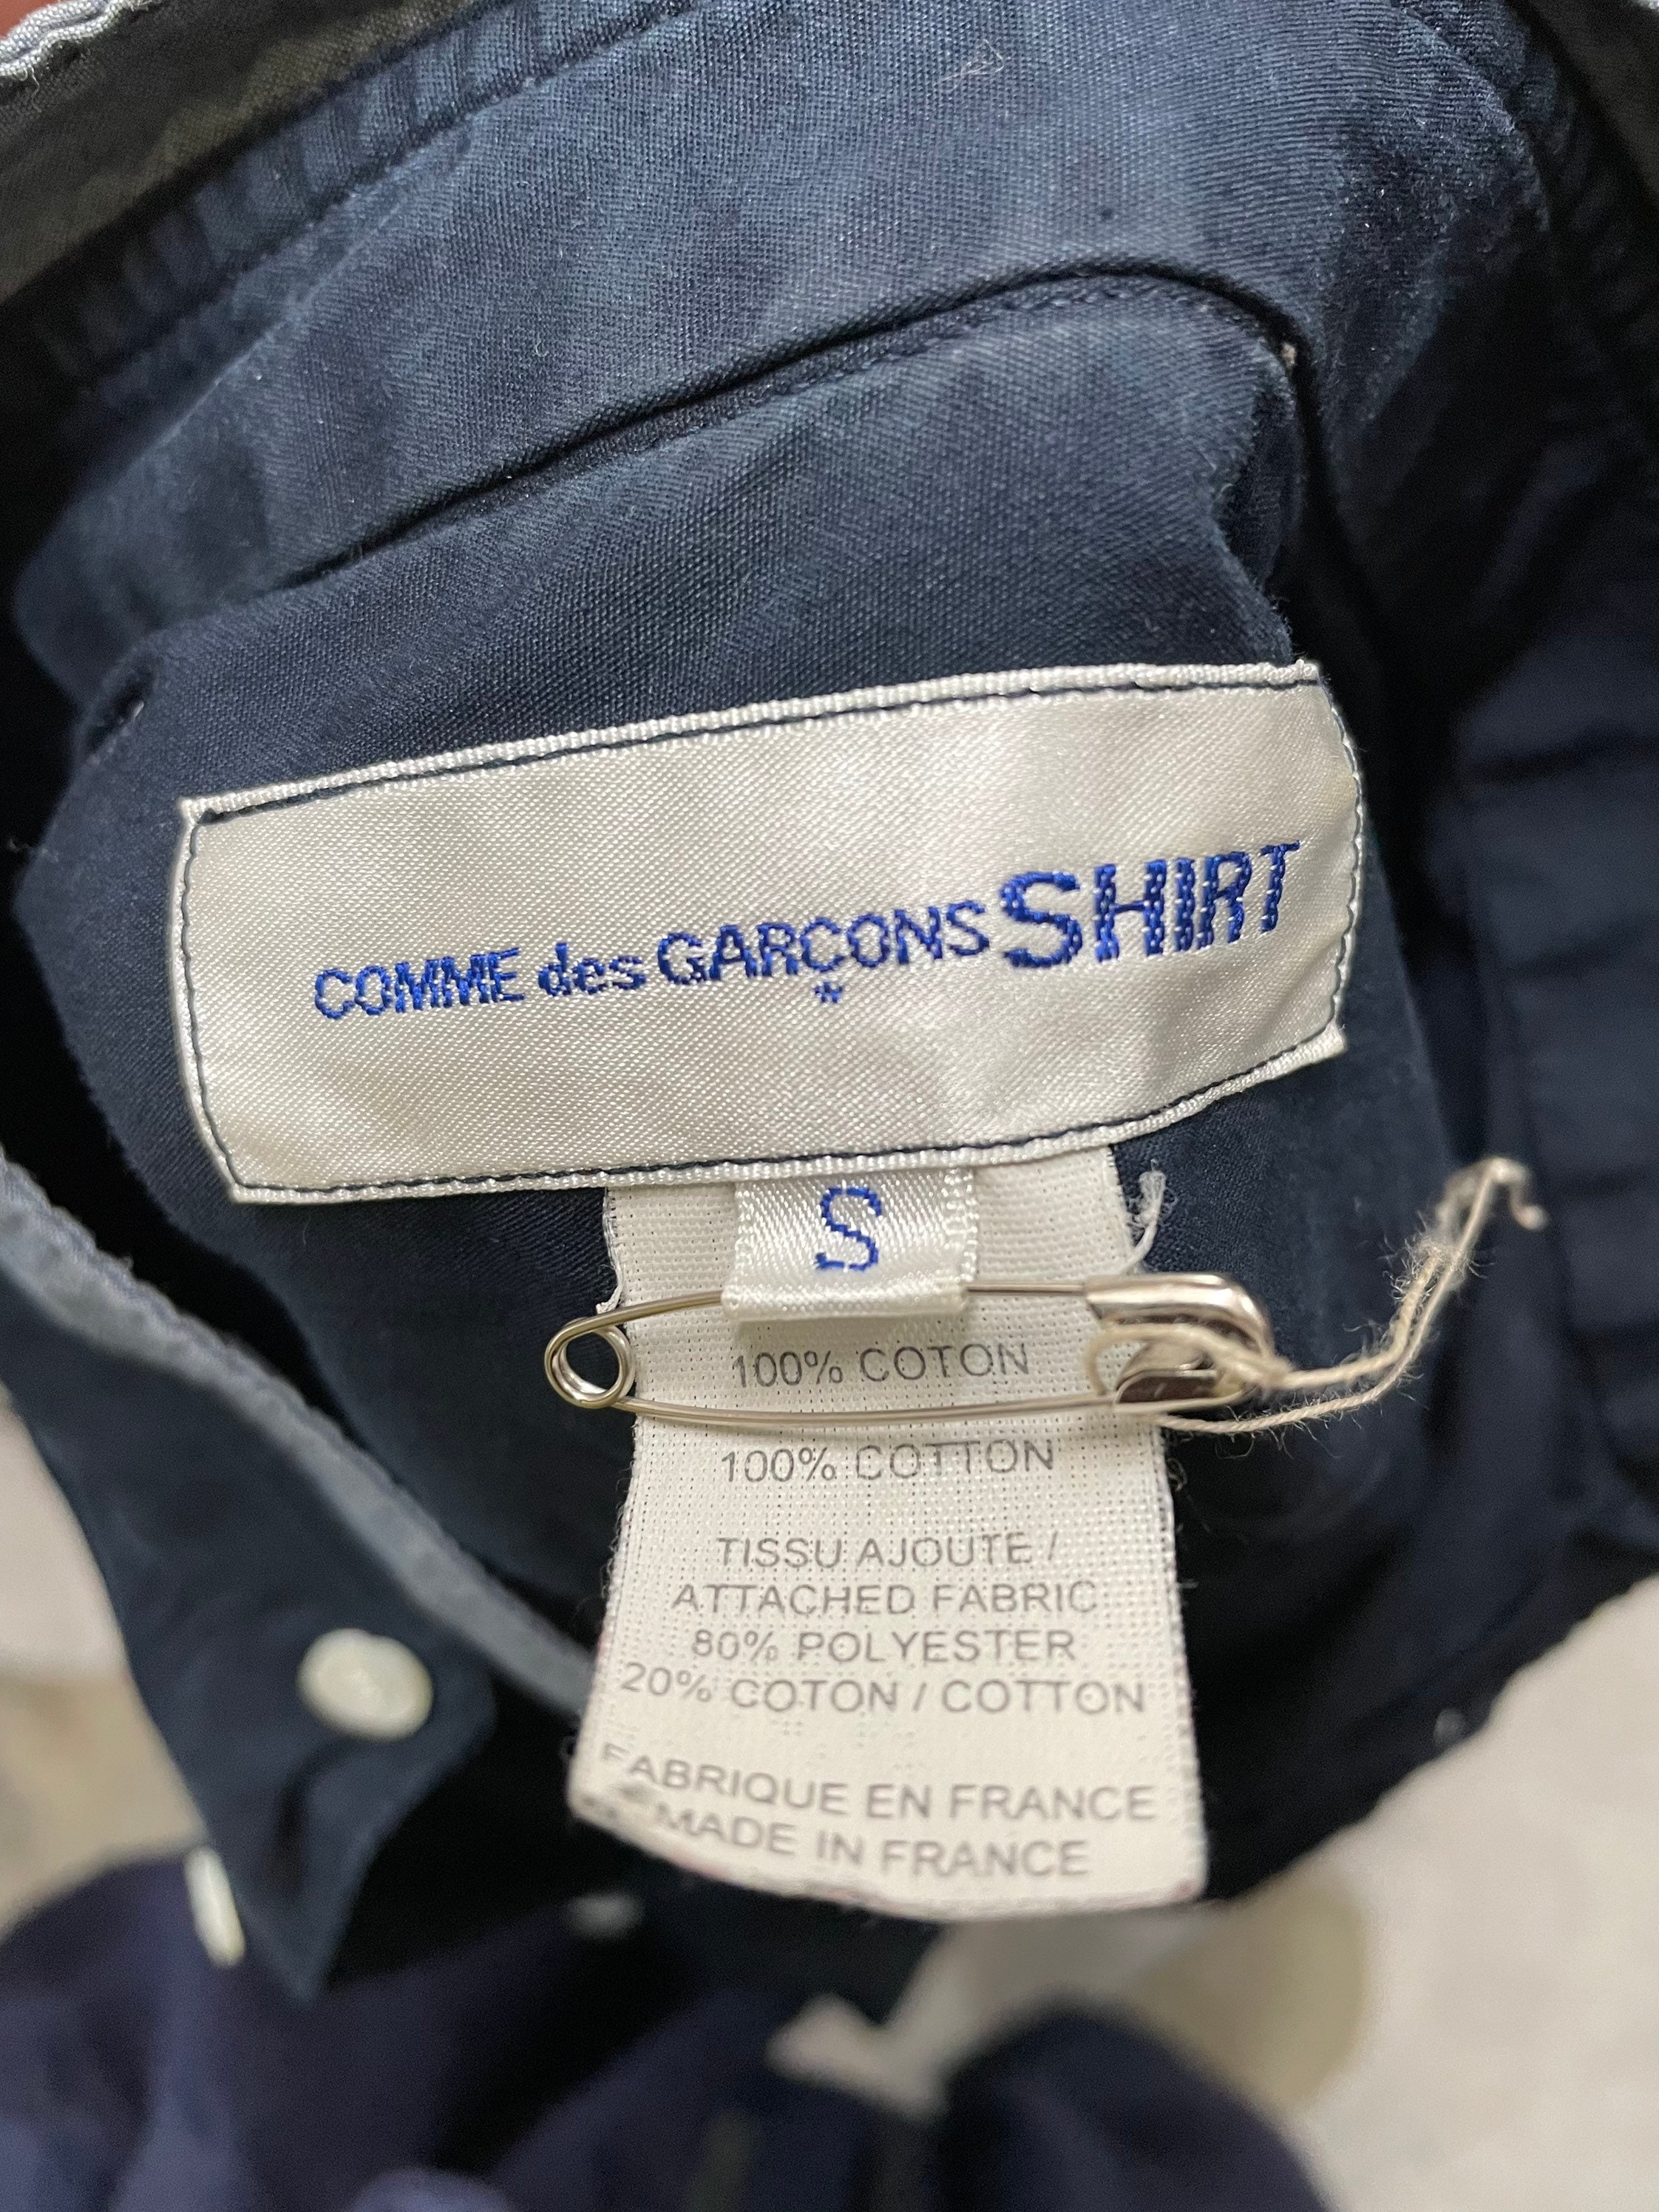 Comme Des Garçons Archives Small Collar Shirt From 2004 - Etsy